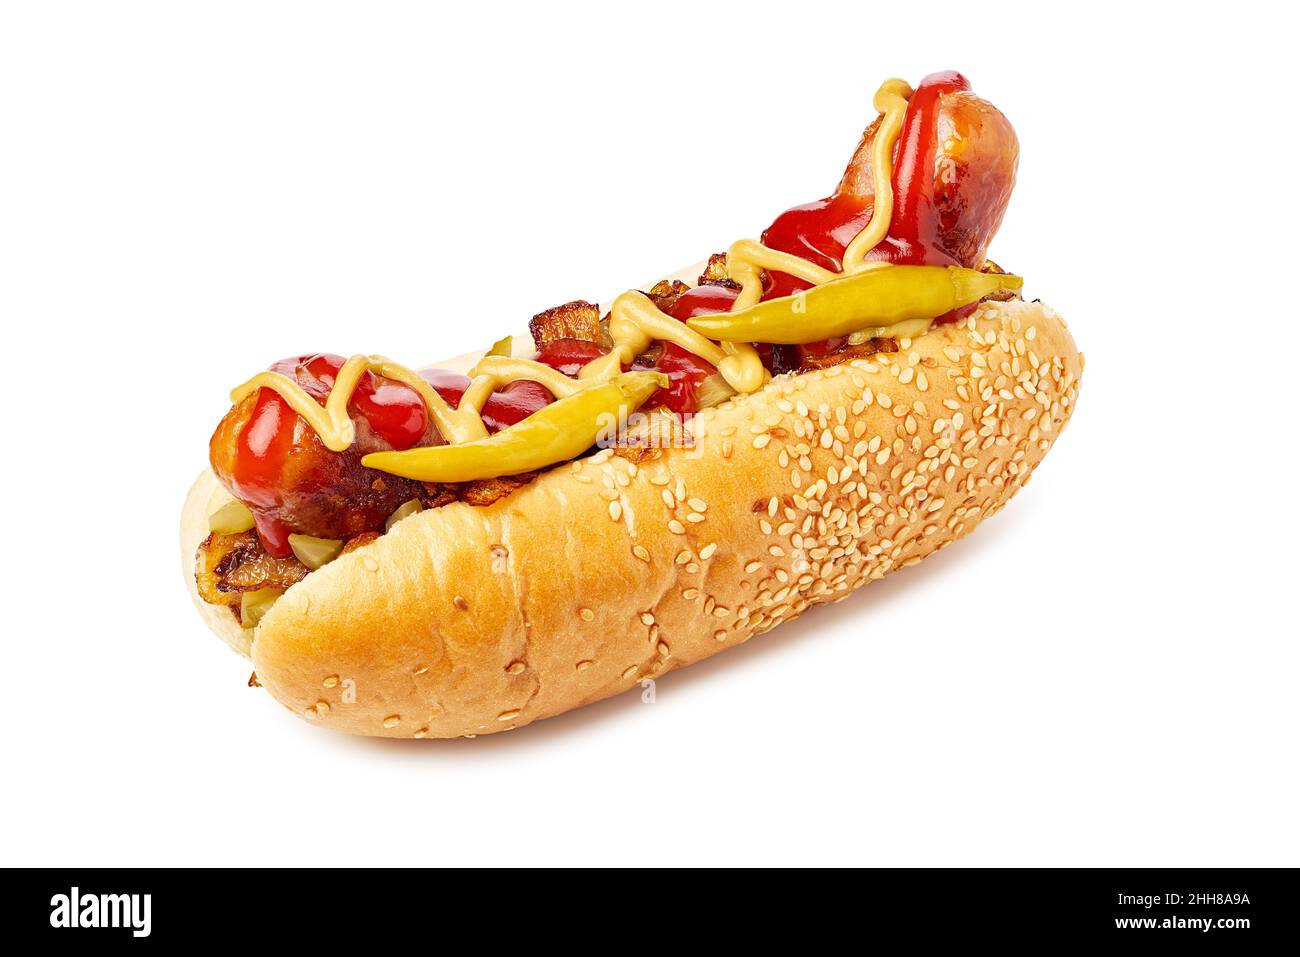 Hotdog with thick sausage and fried onion on white background Stock Photo